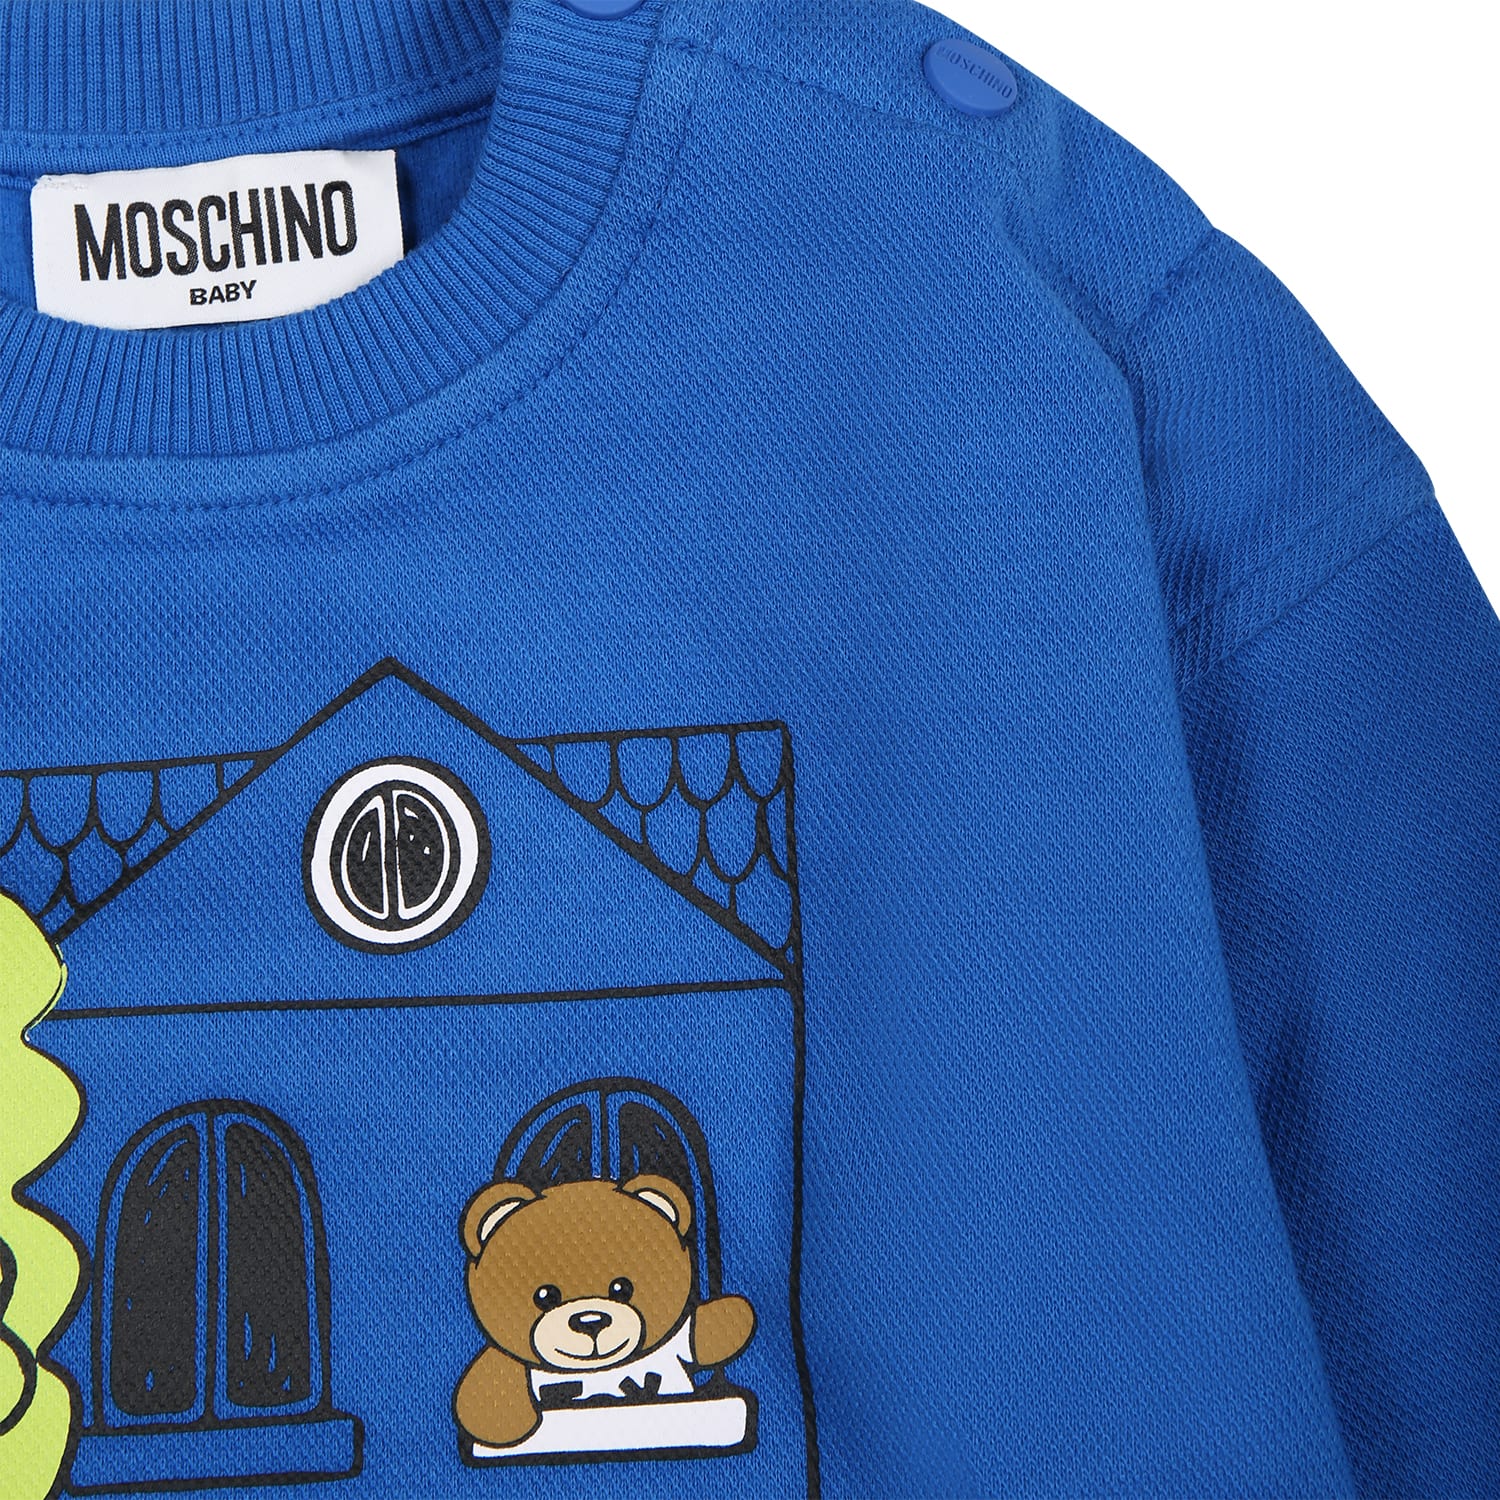 Shop Moschino Blue Sweatshirt For Baby Boy With Teddy Bears And Logo